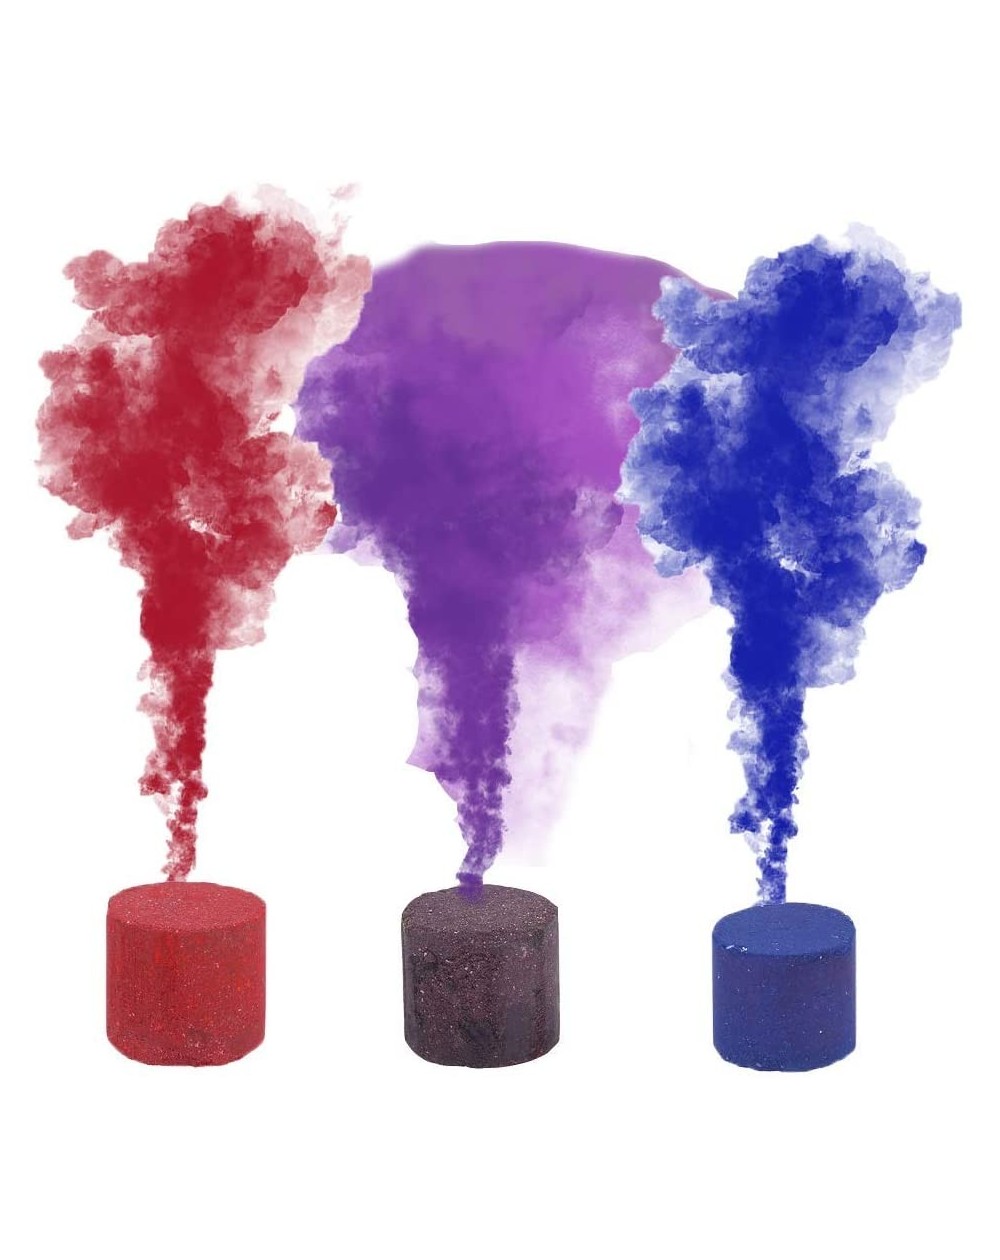 Cake Decorating Supplies Colored Smoke_Cakes for Photography- Colorful Fog Effect Maker Stage Show Photography Film Backgroun...